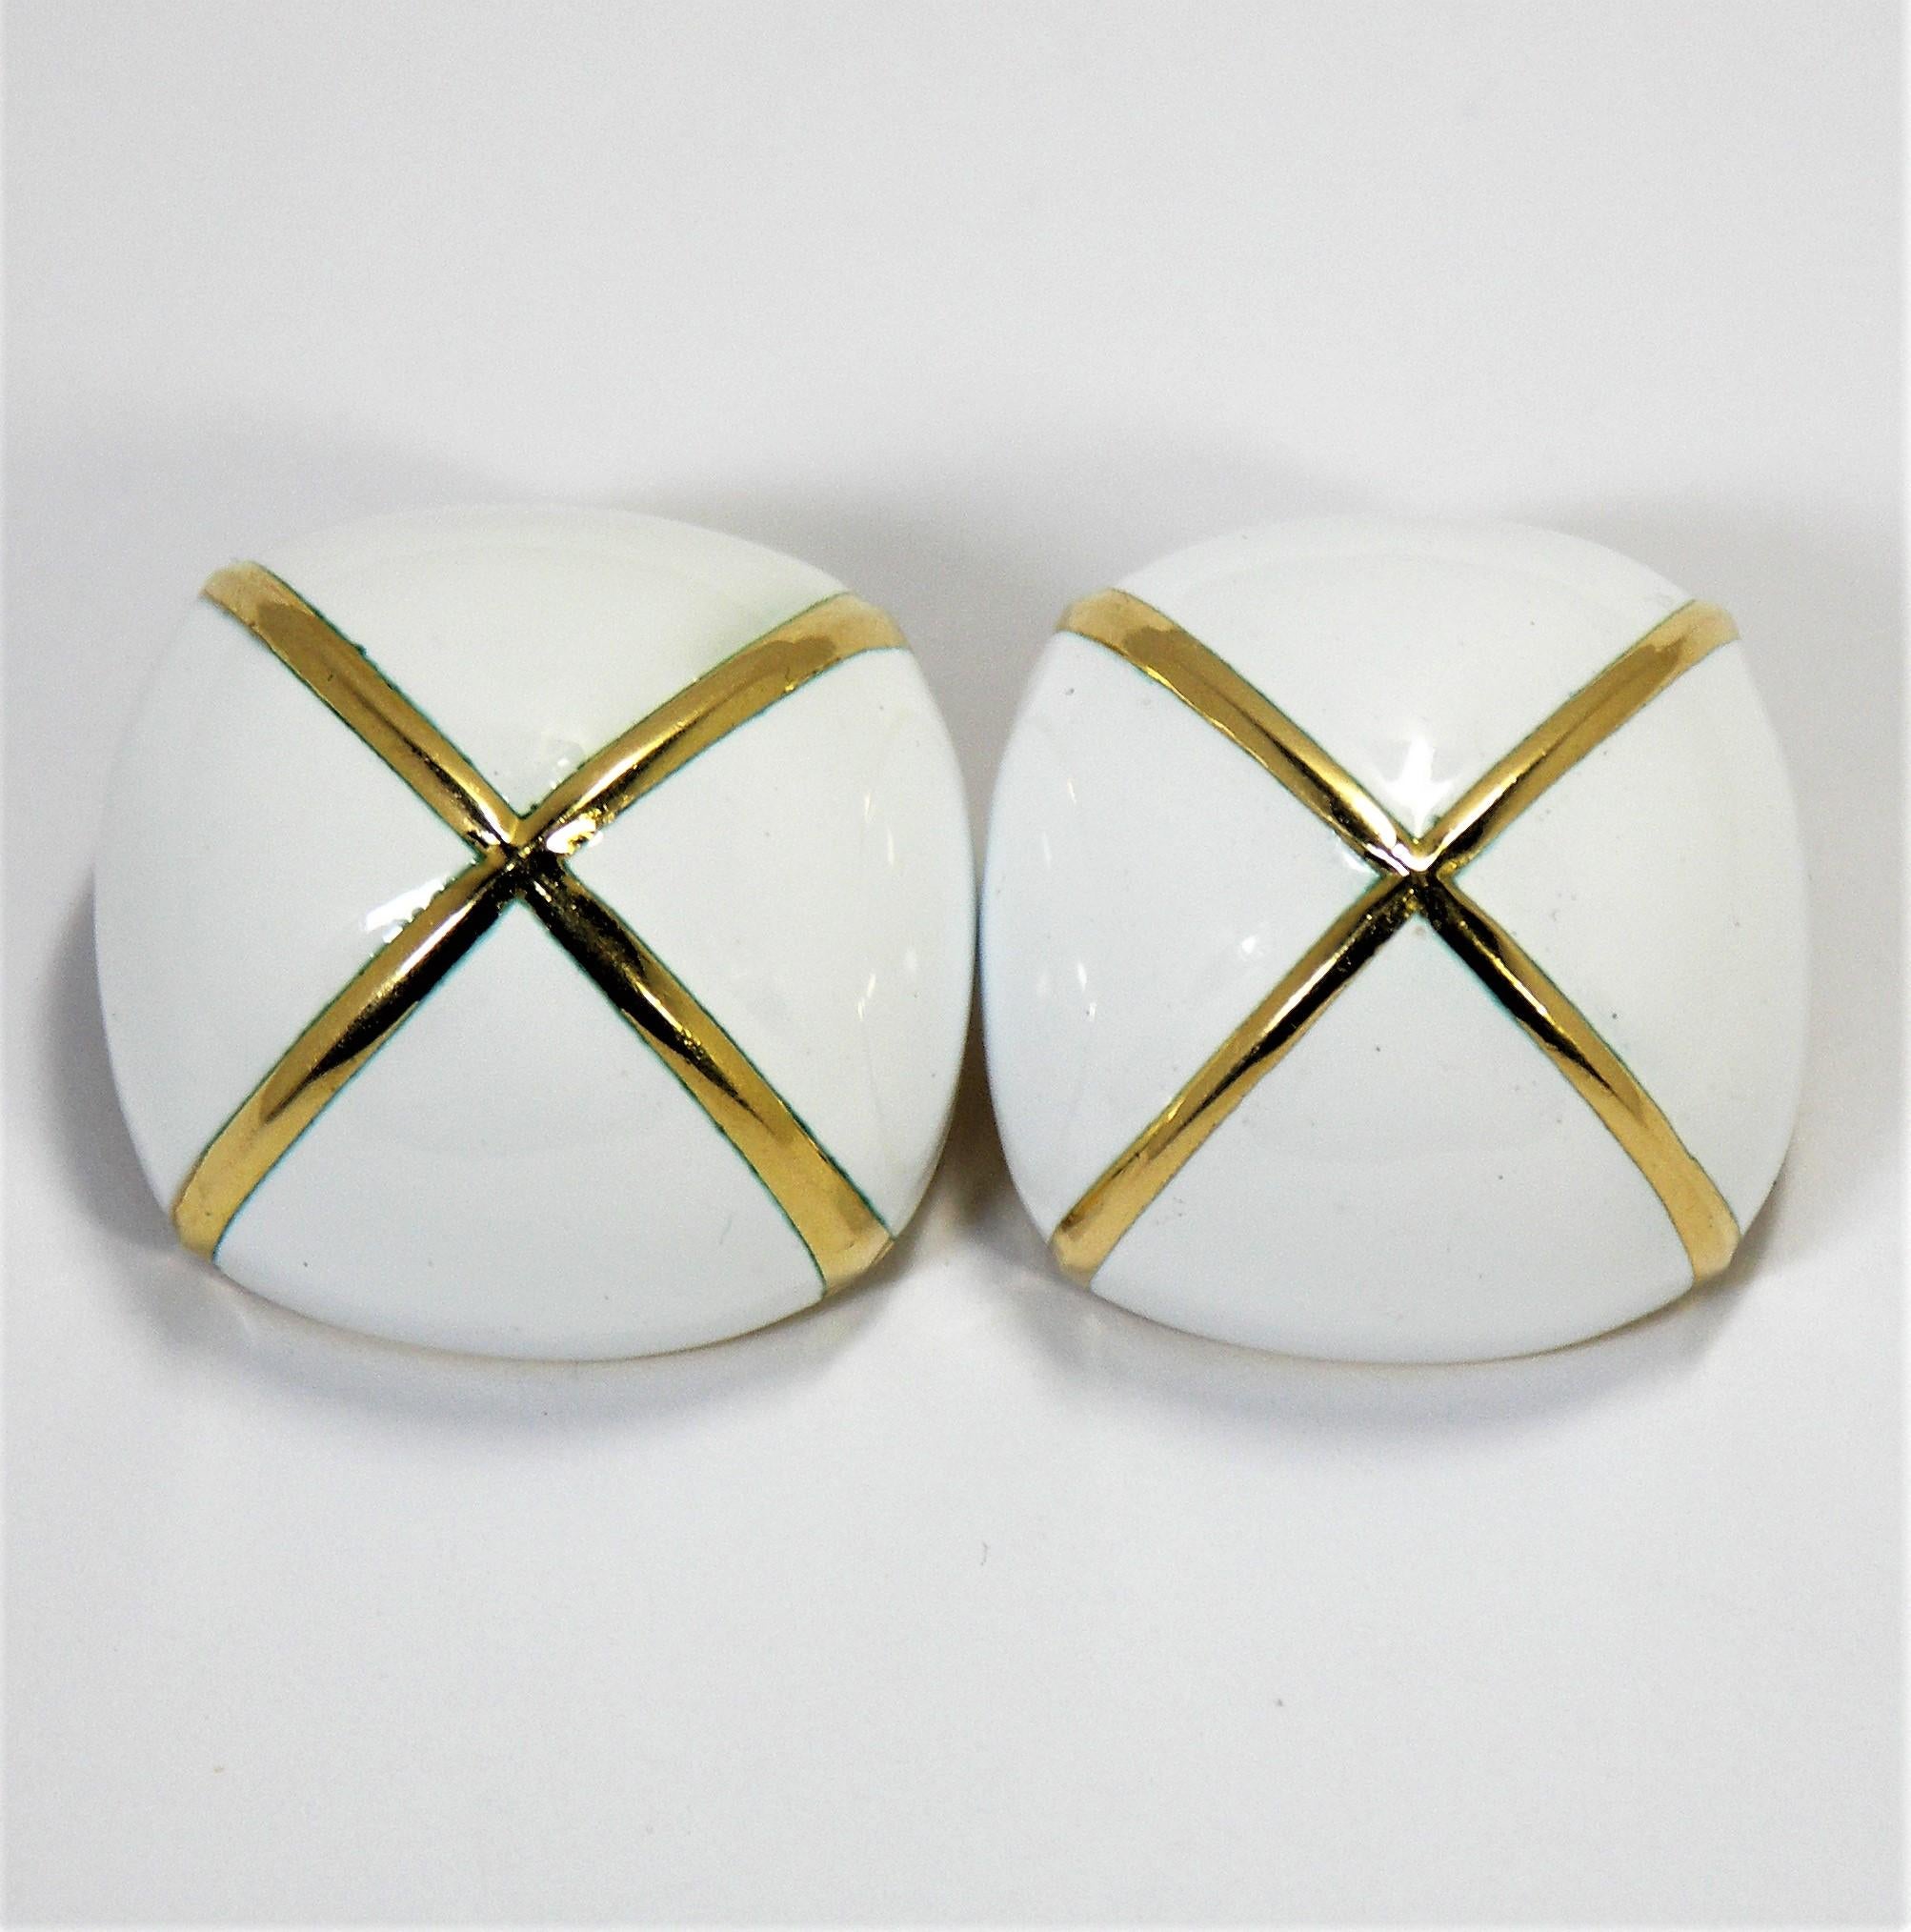 These large David Webb earrings are made of 18K Yellow Gold and white enamel 
with a large gold 